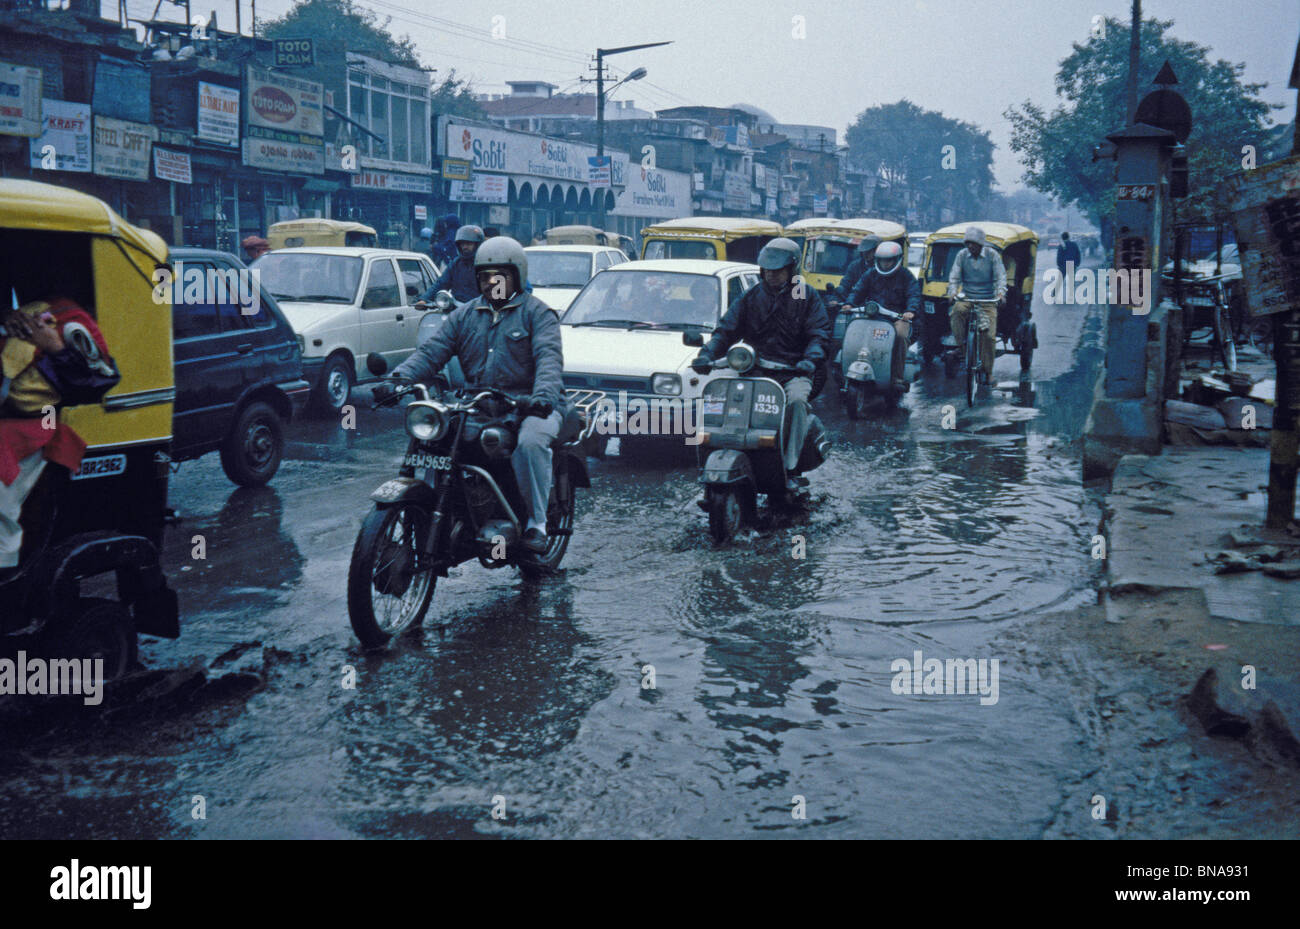 India Monsoon Commuting - Commuting in the monsoon season in India can be an unnerving experience. Stock Photo